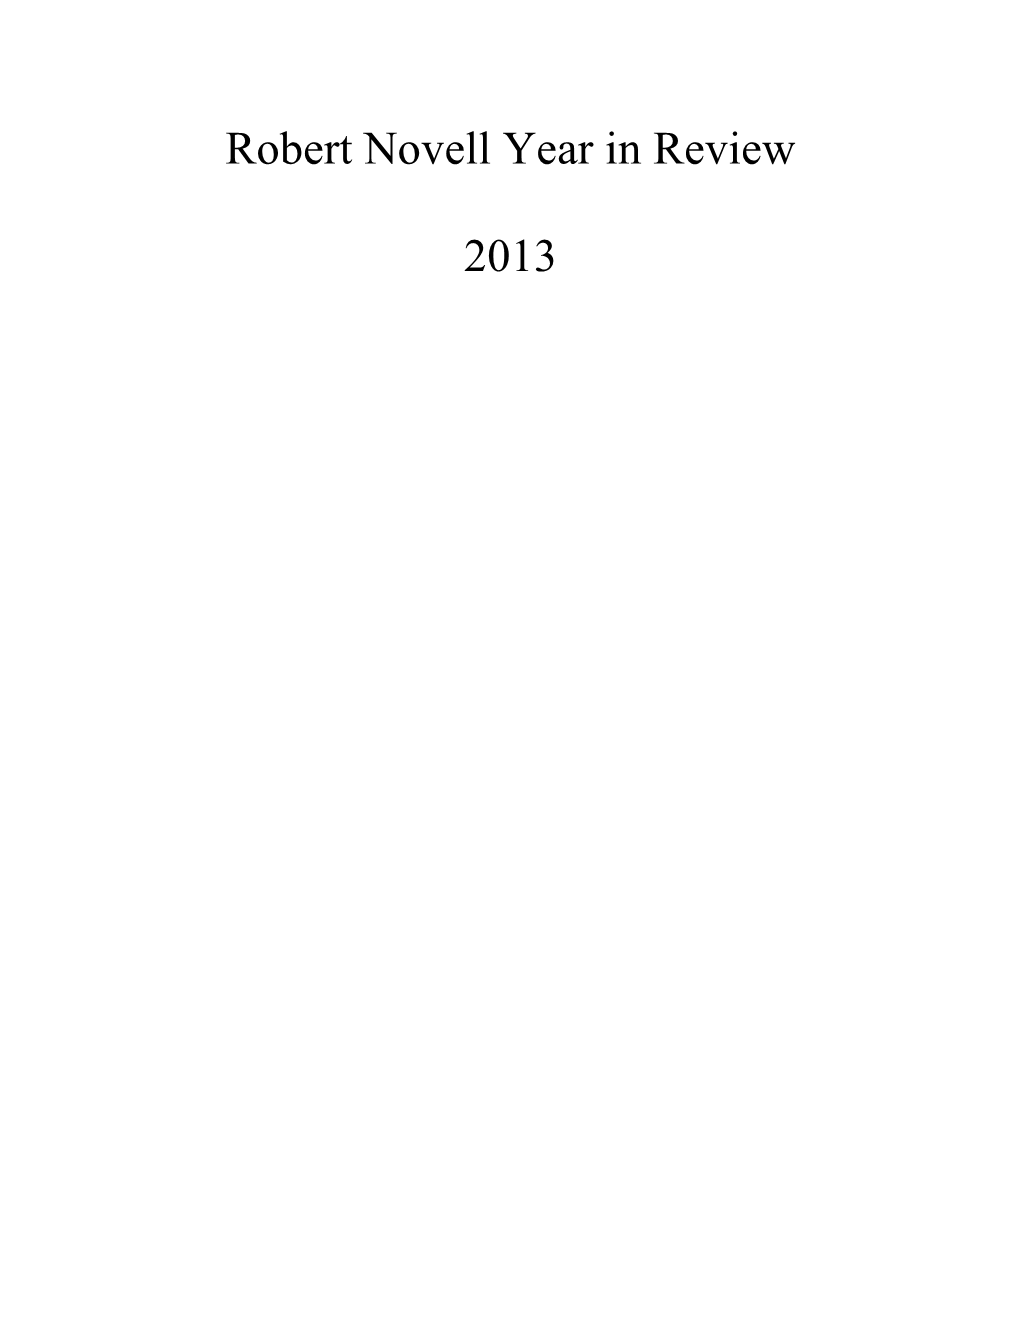 Robert Novell Year in Review 2013